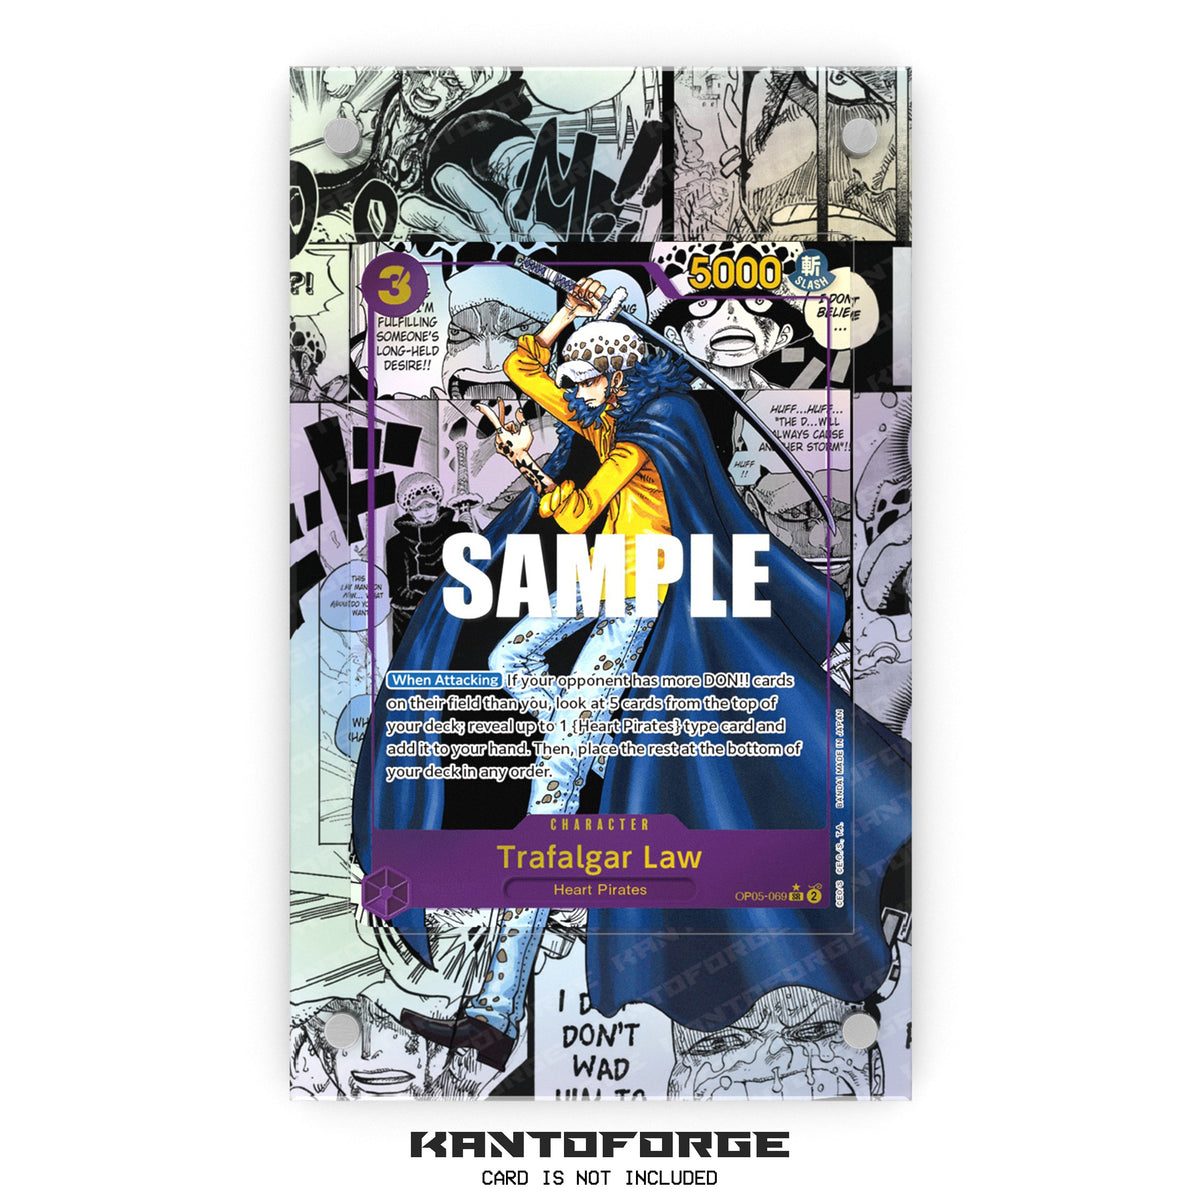 Trafalgar Law Manga OP05-069 - One Piece Extended Artwork Protective Card Display Case